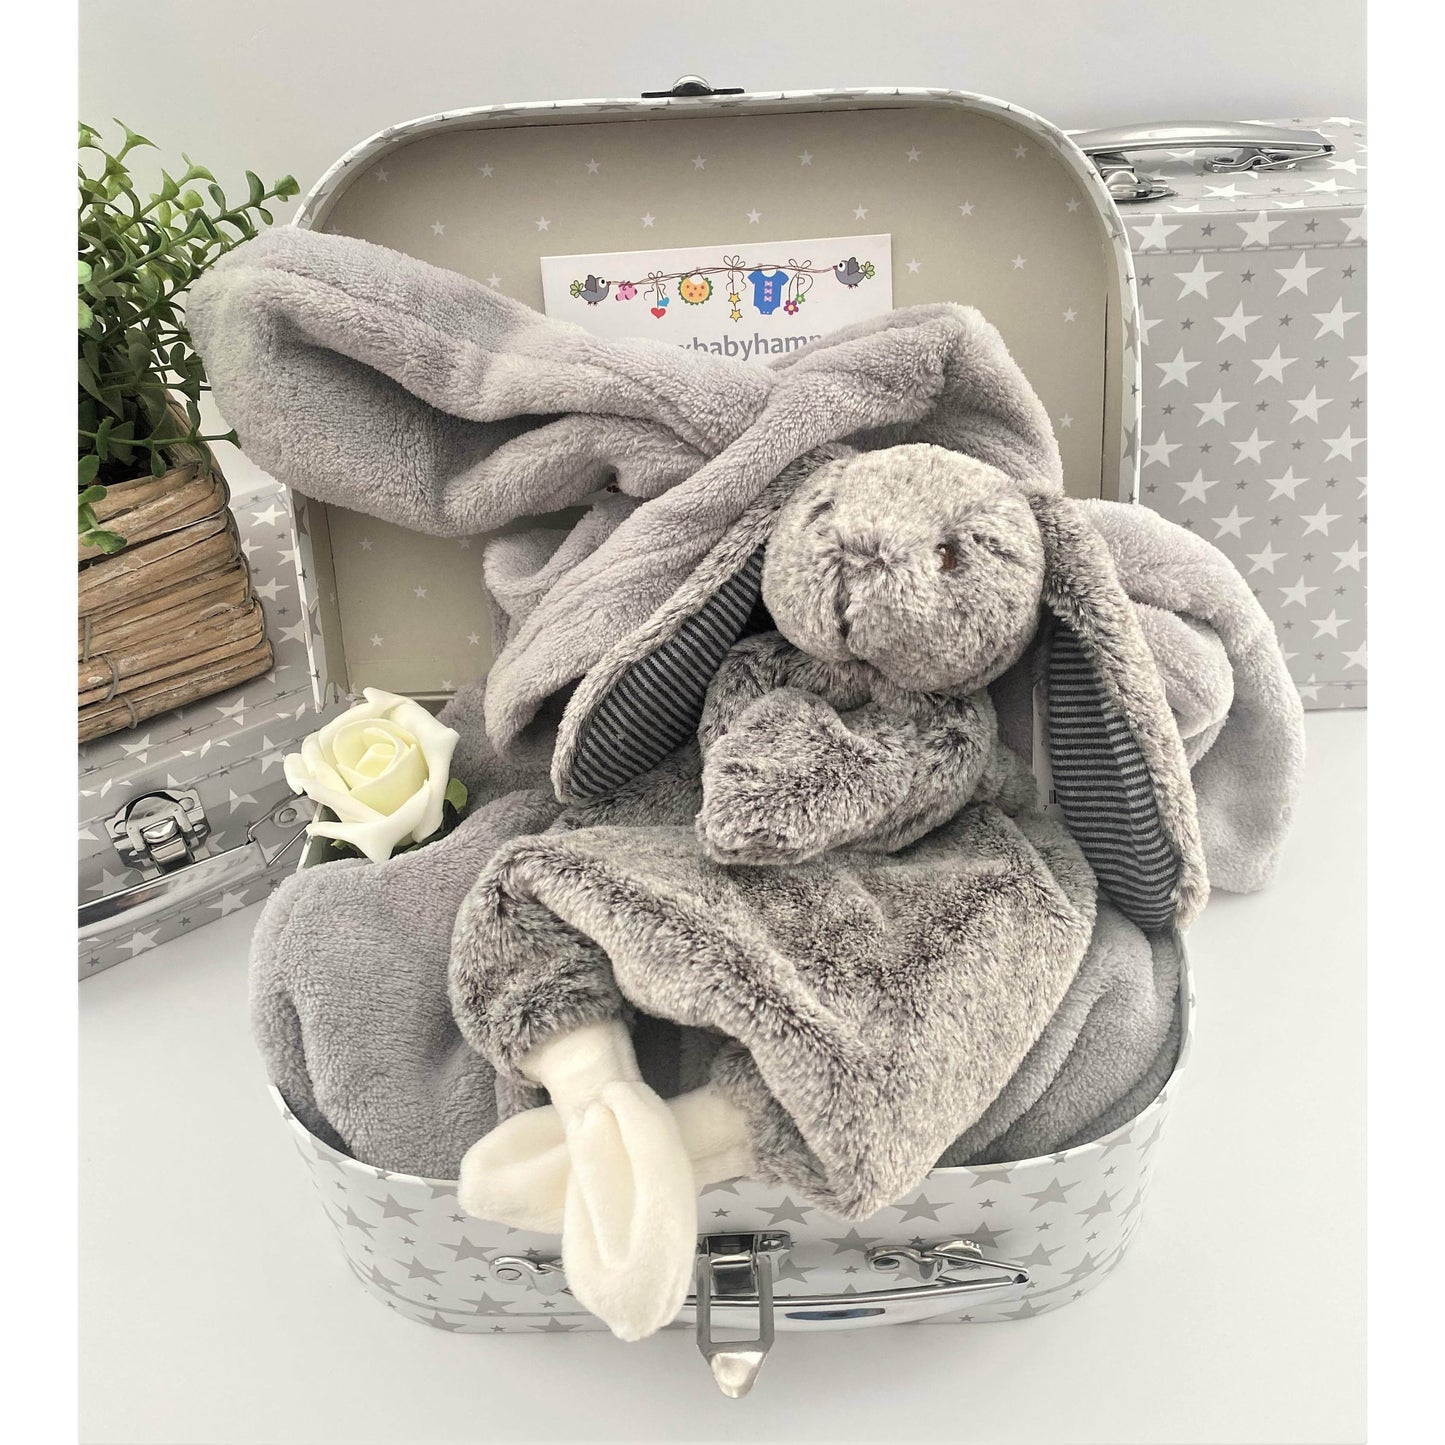 A baby keepsake case contains a grey baby dressing gown with long bunny ears on the hood and a Mary Meyer soft bunny lovey baby toy in grey and white.